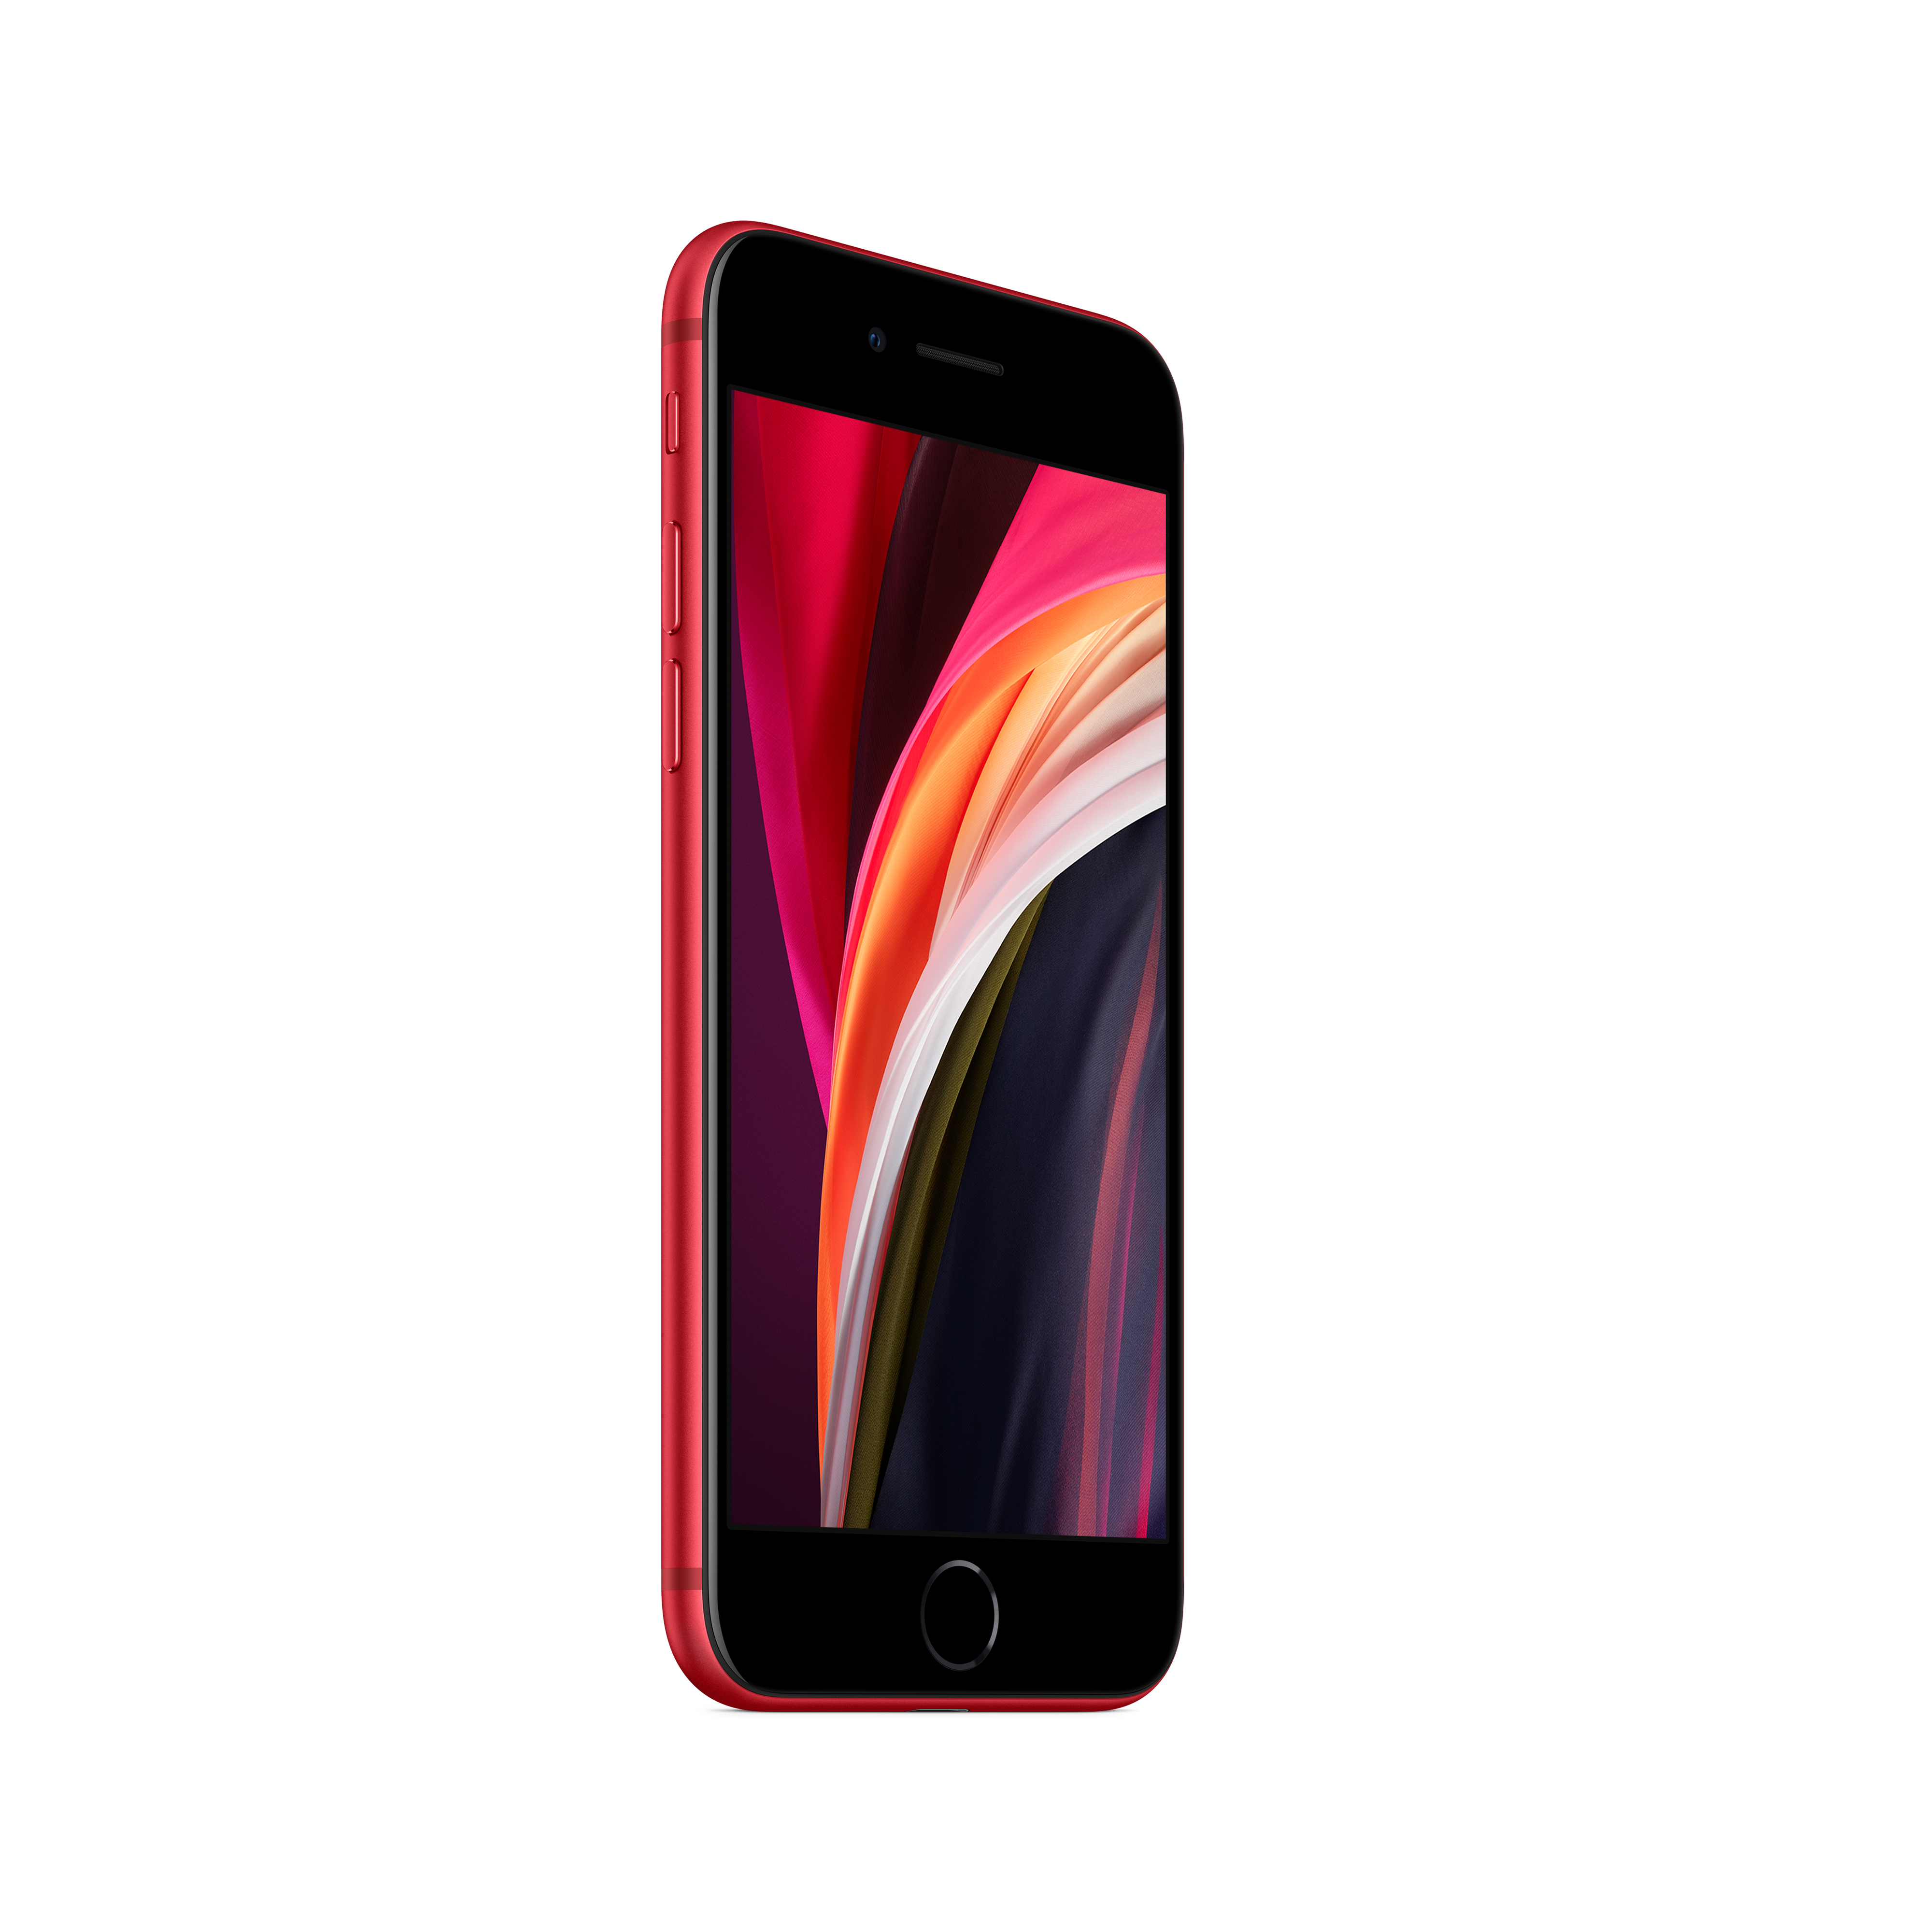 Restored Apple iPhone SE 2nd Generation (2020) - Carrier Unlocked - 64 GB Red (Refurbished) - image 5 of 7